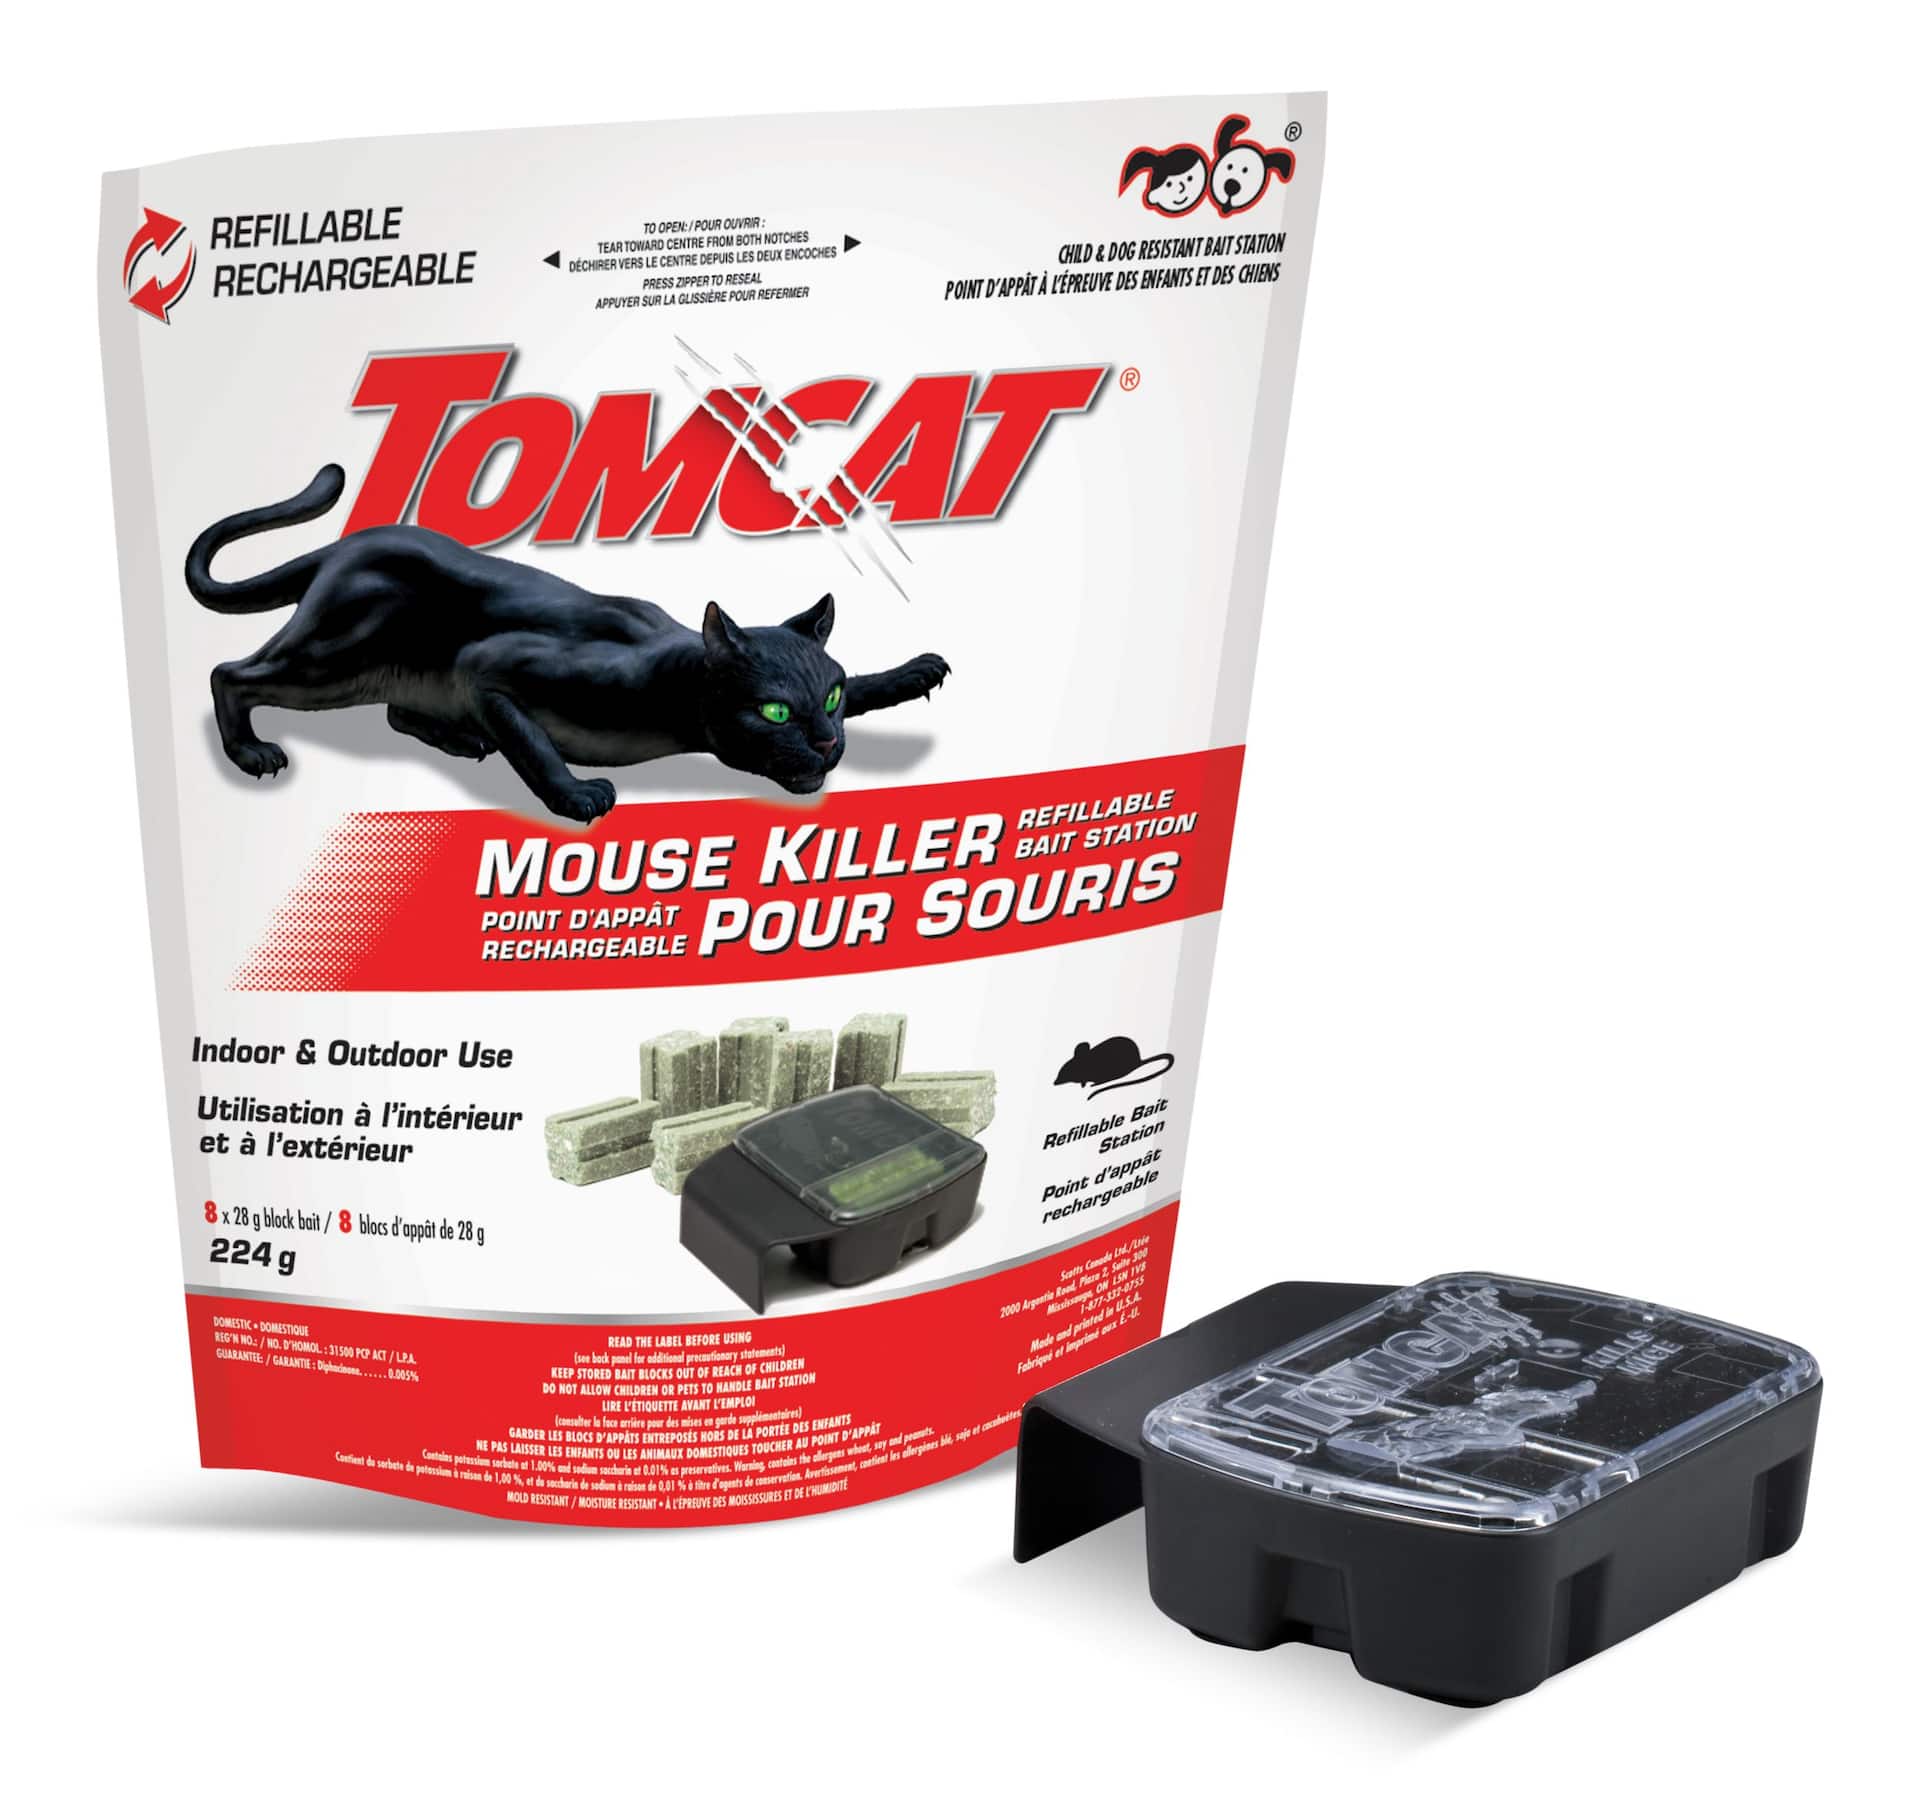 https://media-www.canadiantire.ca/product/seasonal-gardening/gardening/weed-insect-and-pest-control/0591679/tomcat-mouse-killer-refillable-bait-station-8-pack-0f1ff179-7d2b-4605-82ab-b154c8ce078b-jpgrendition.jpg